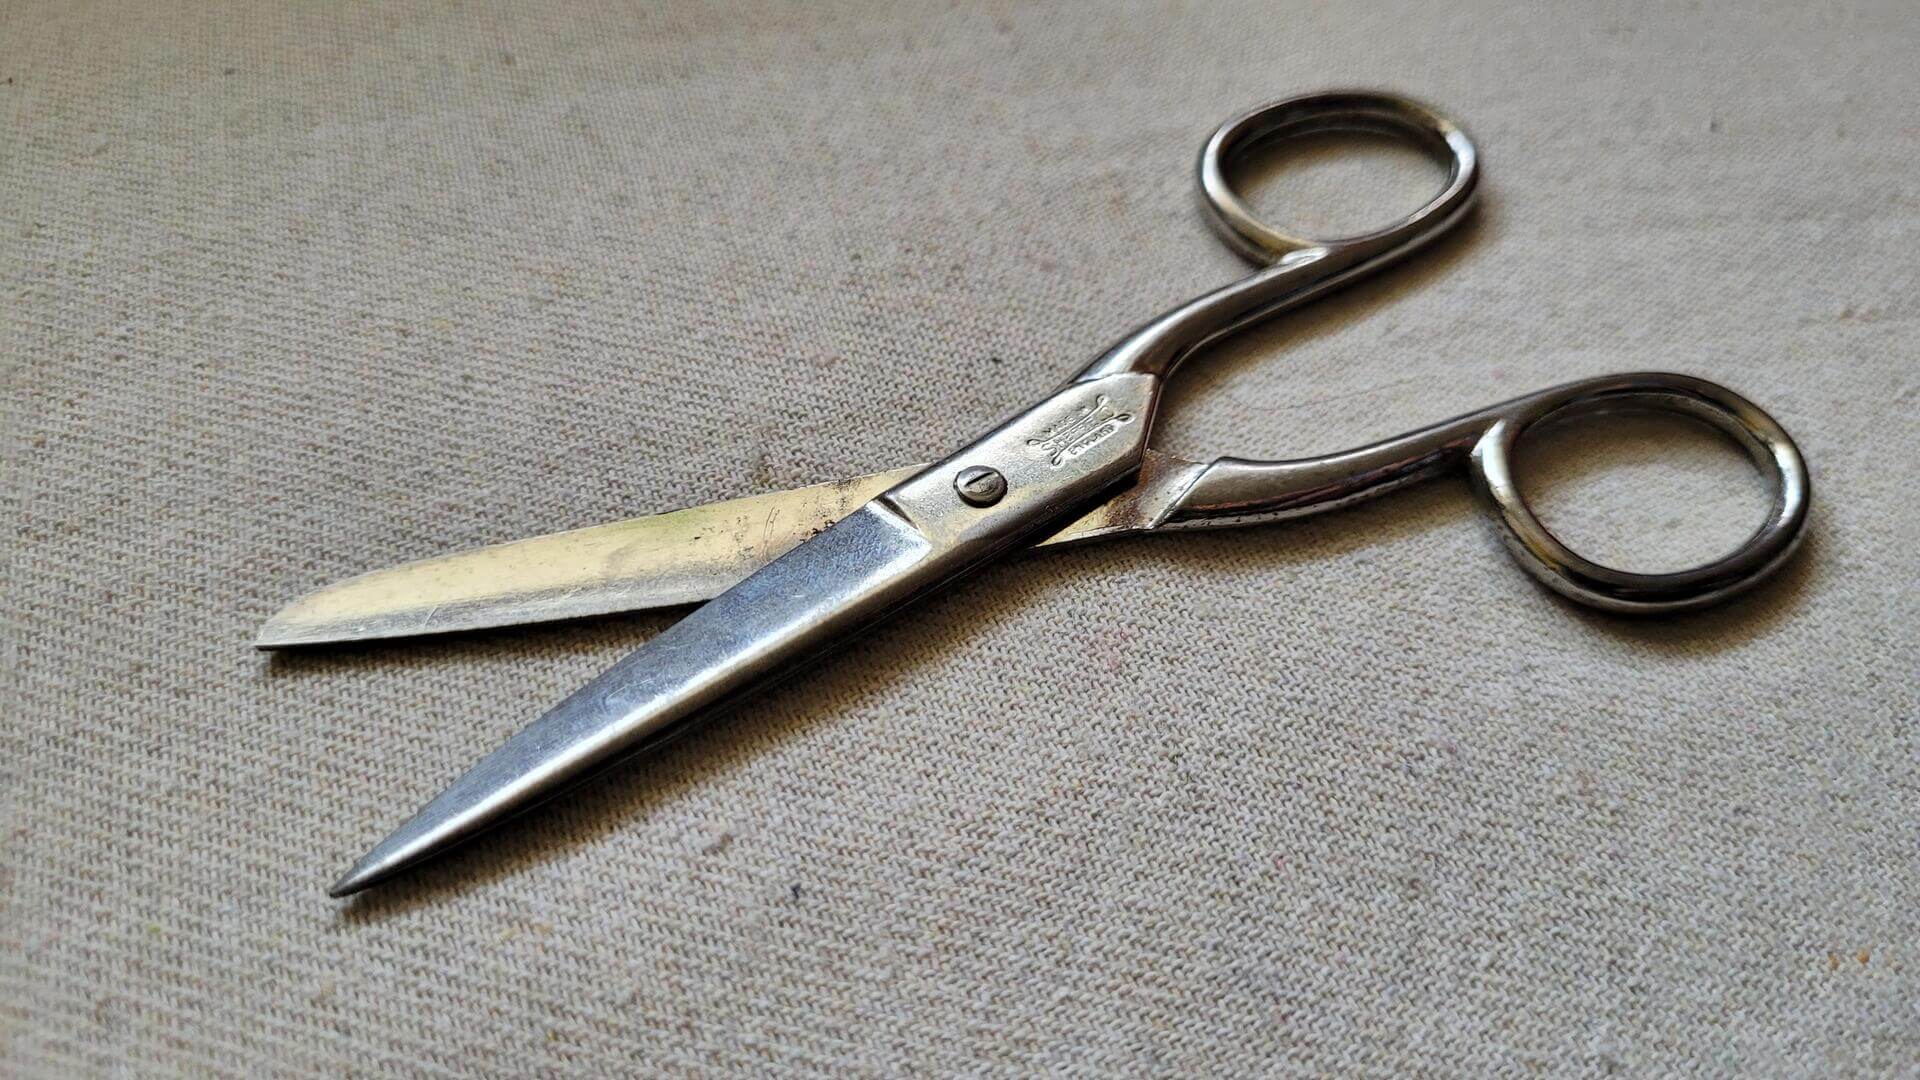 Vintage All Purpose Scissors 5 Inches Made in Sheffield England - antique collectible sewing and cutting hand tools